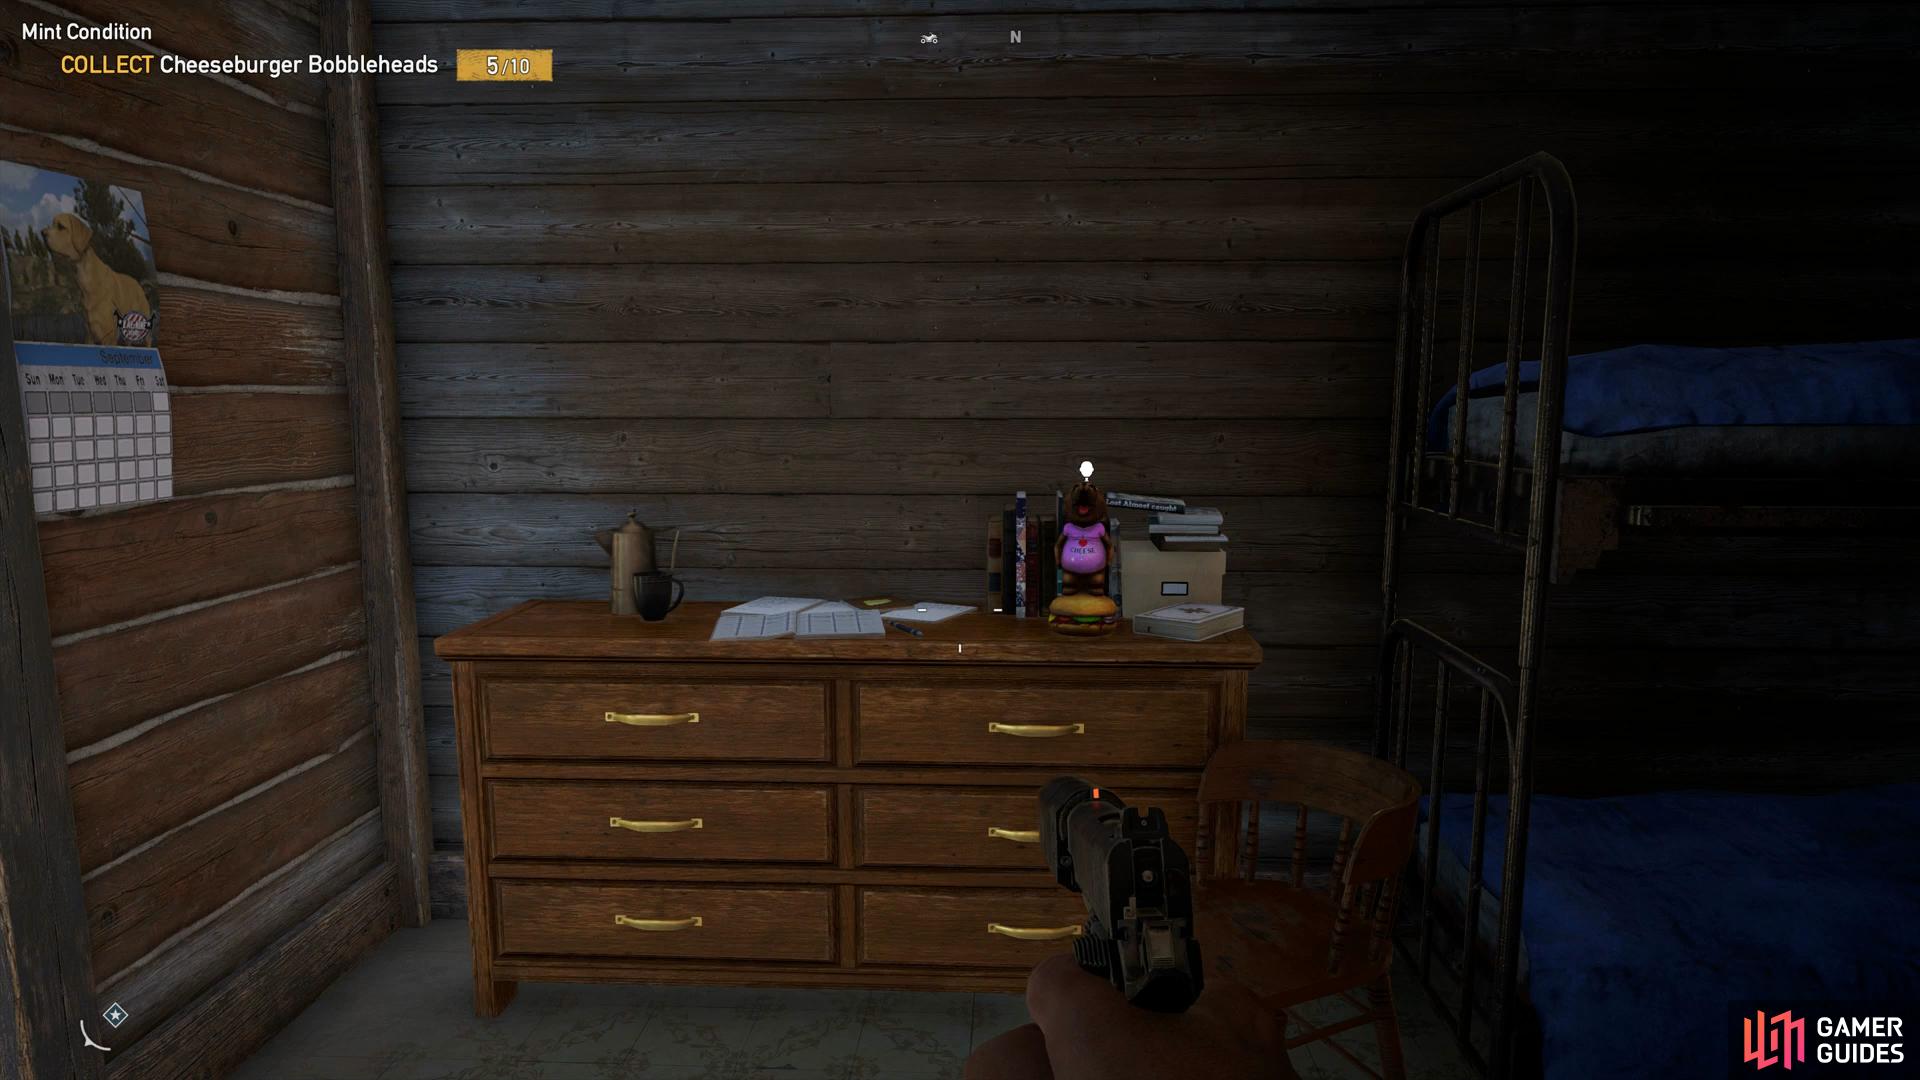 once you clear the Outpost, youll find the Bobblehead in the back room.